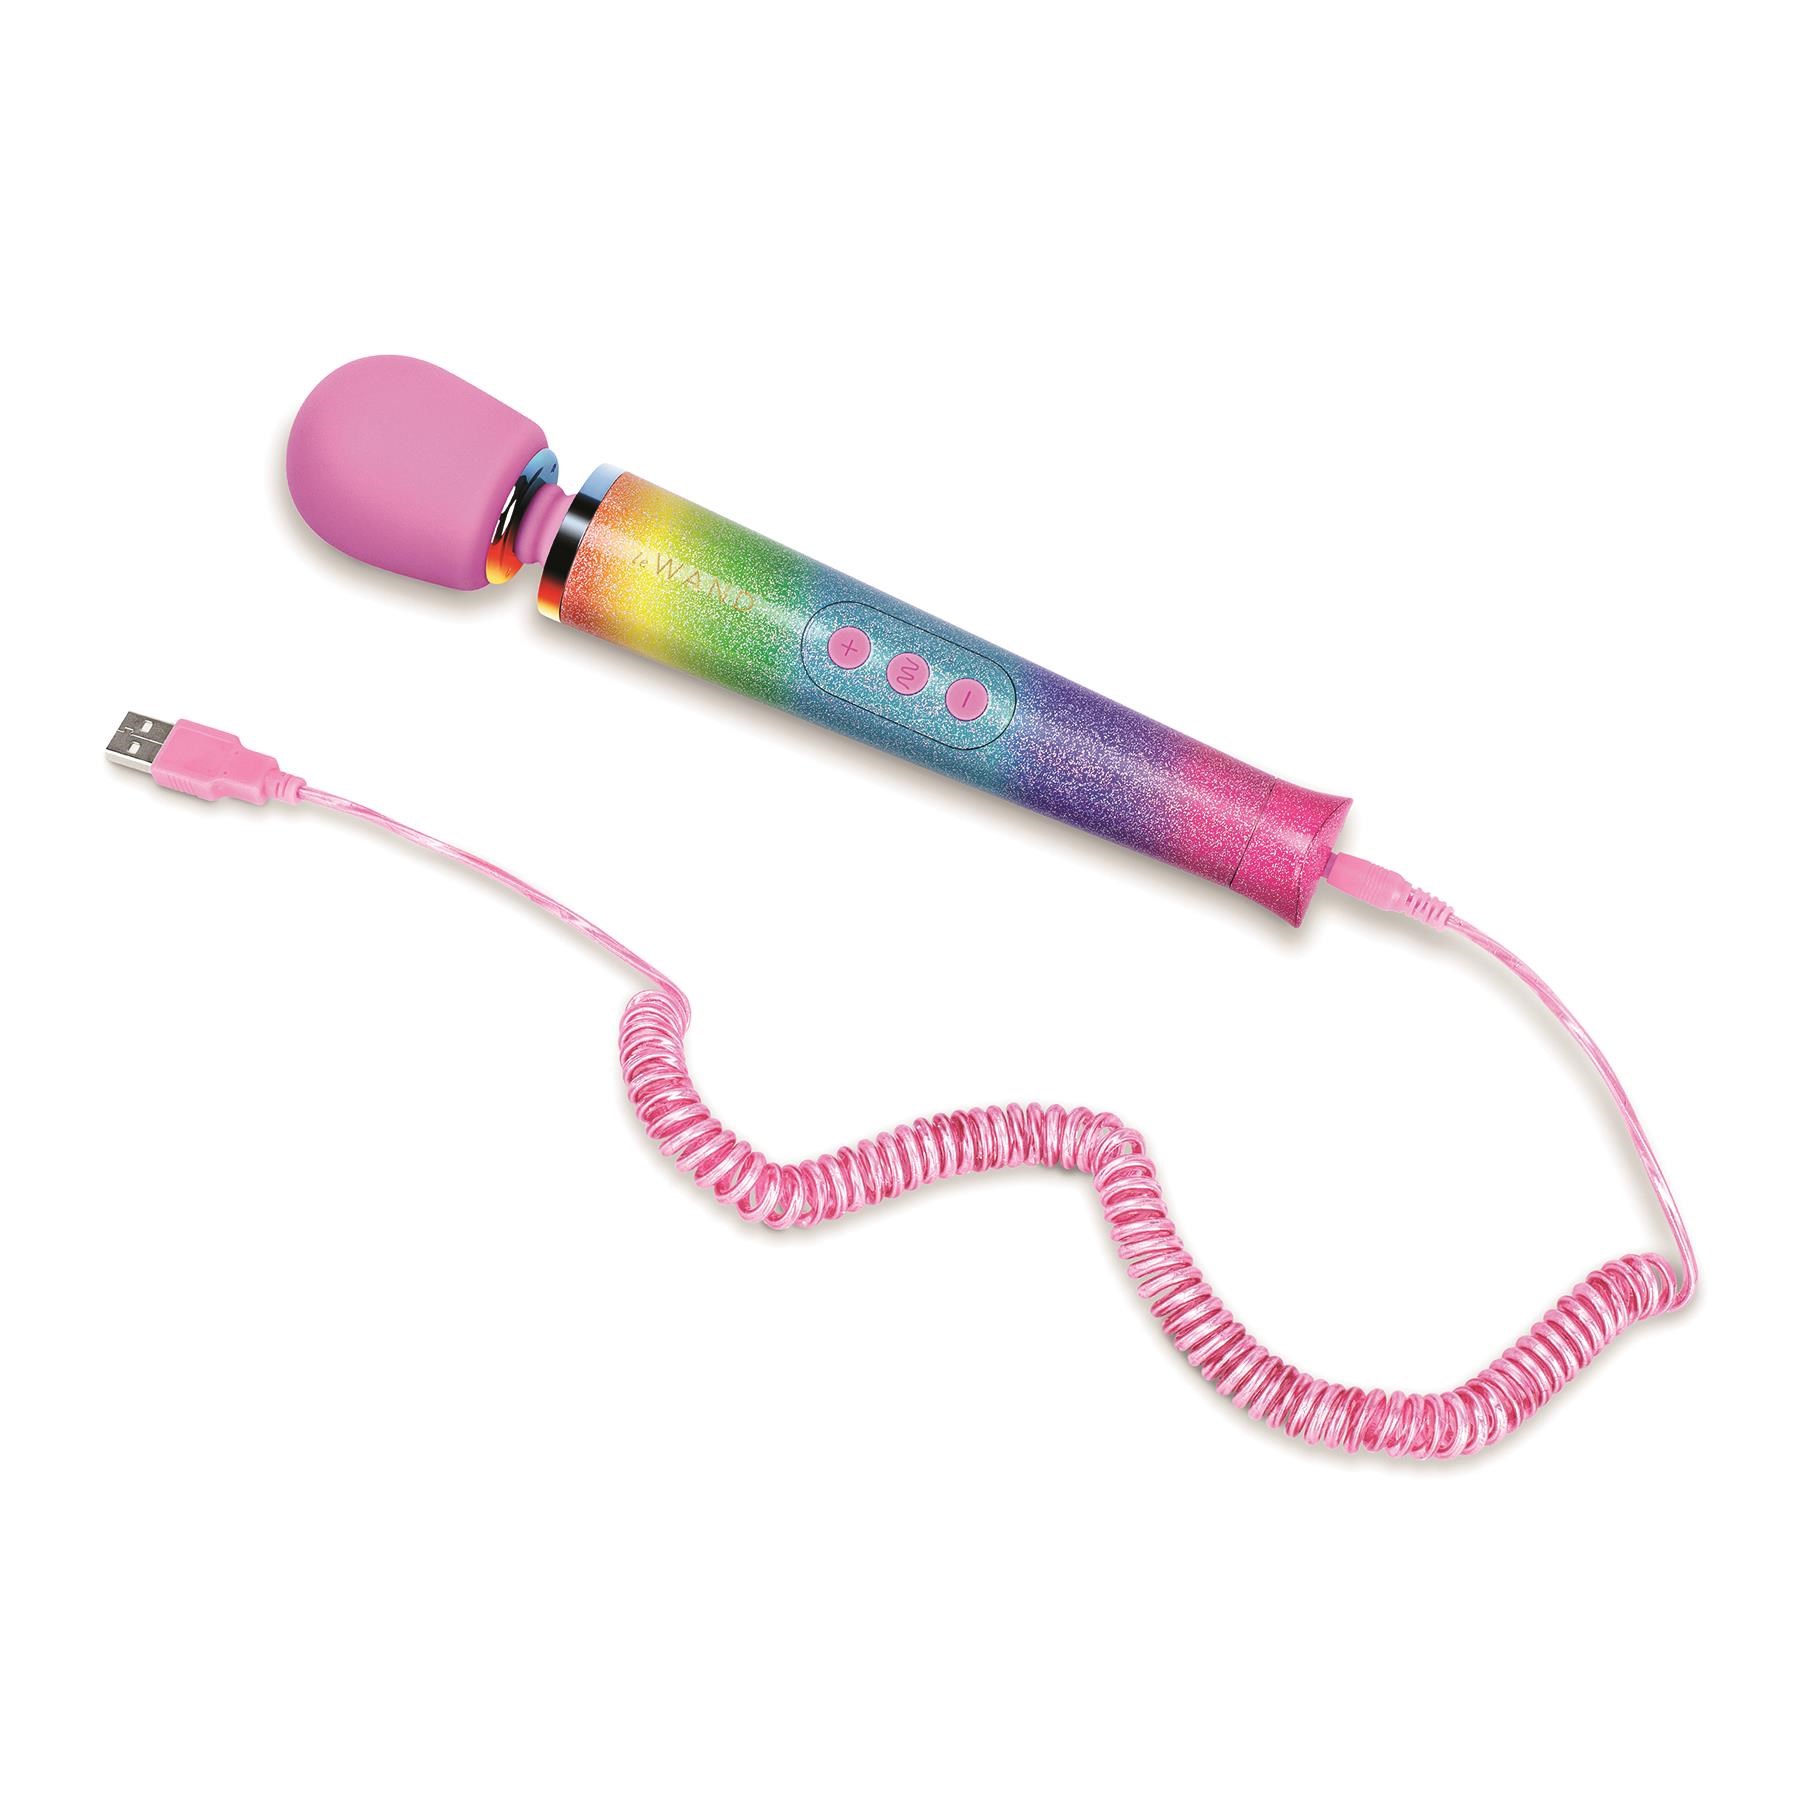 Le Wand All That Glitters Ombre Wand Massager - Showing Where Charging Cord is Placed